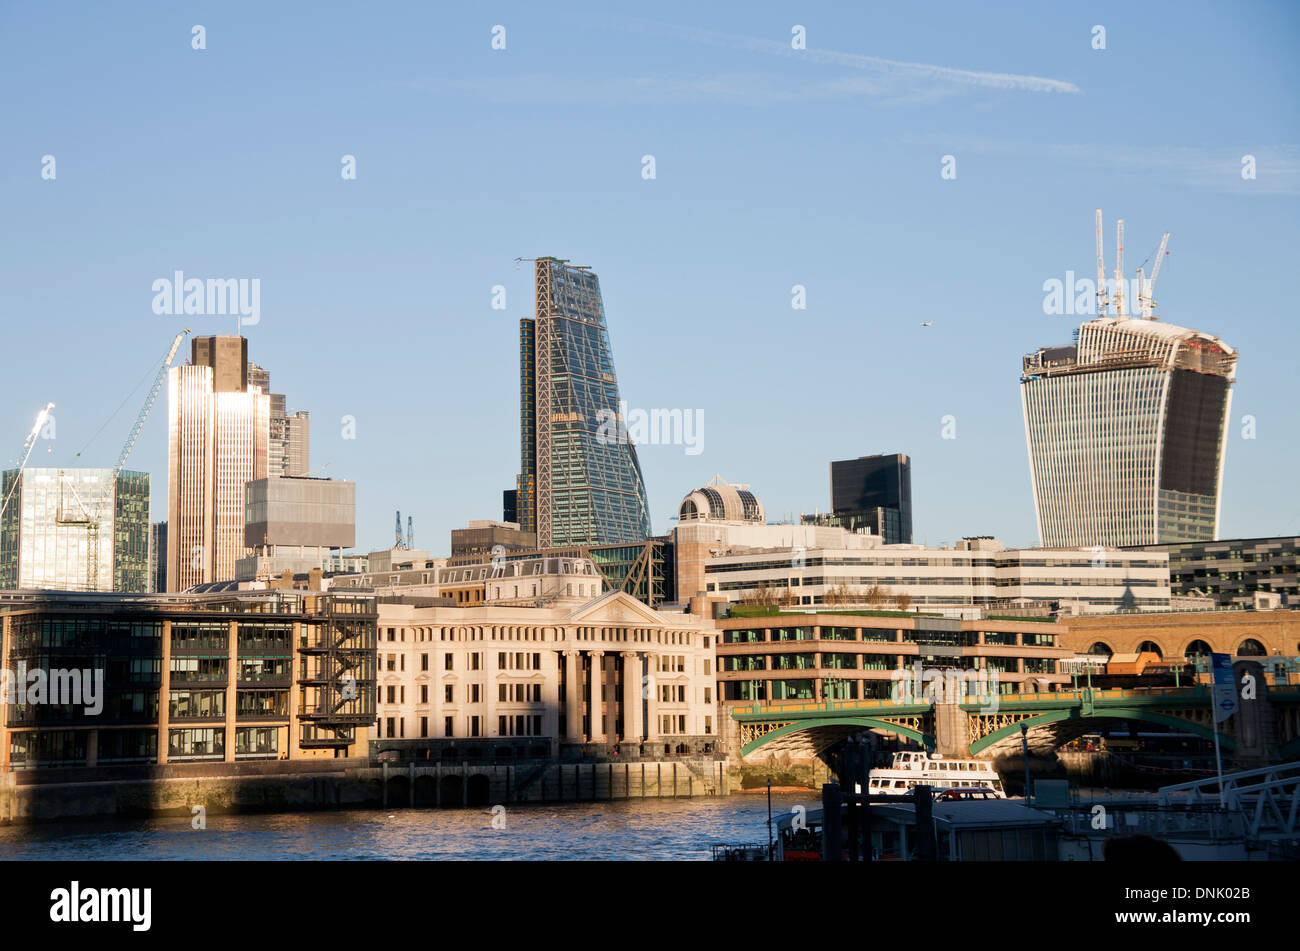 The skyline of the City of London showing Tower 42 and the Leadenhall Building, London, England, United Kingdom Stock Photo